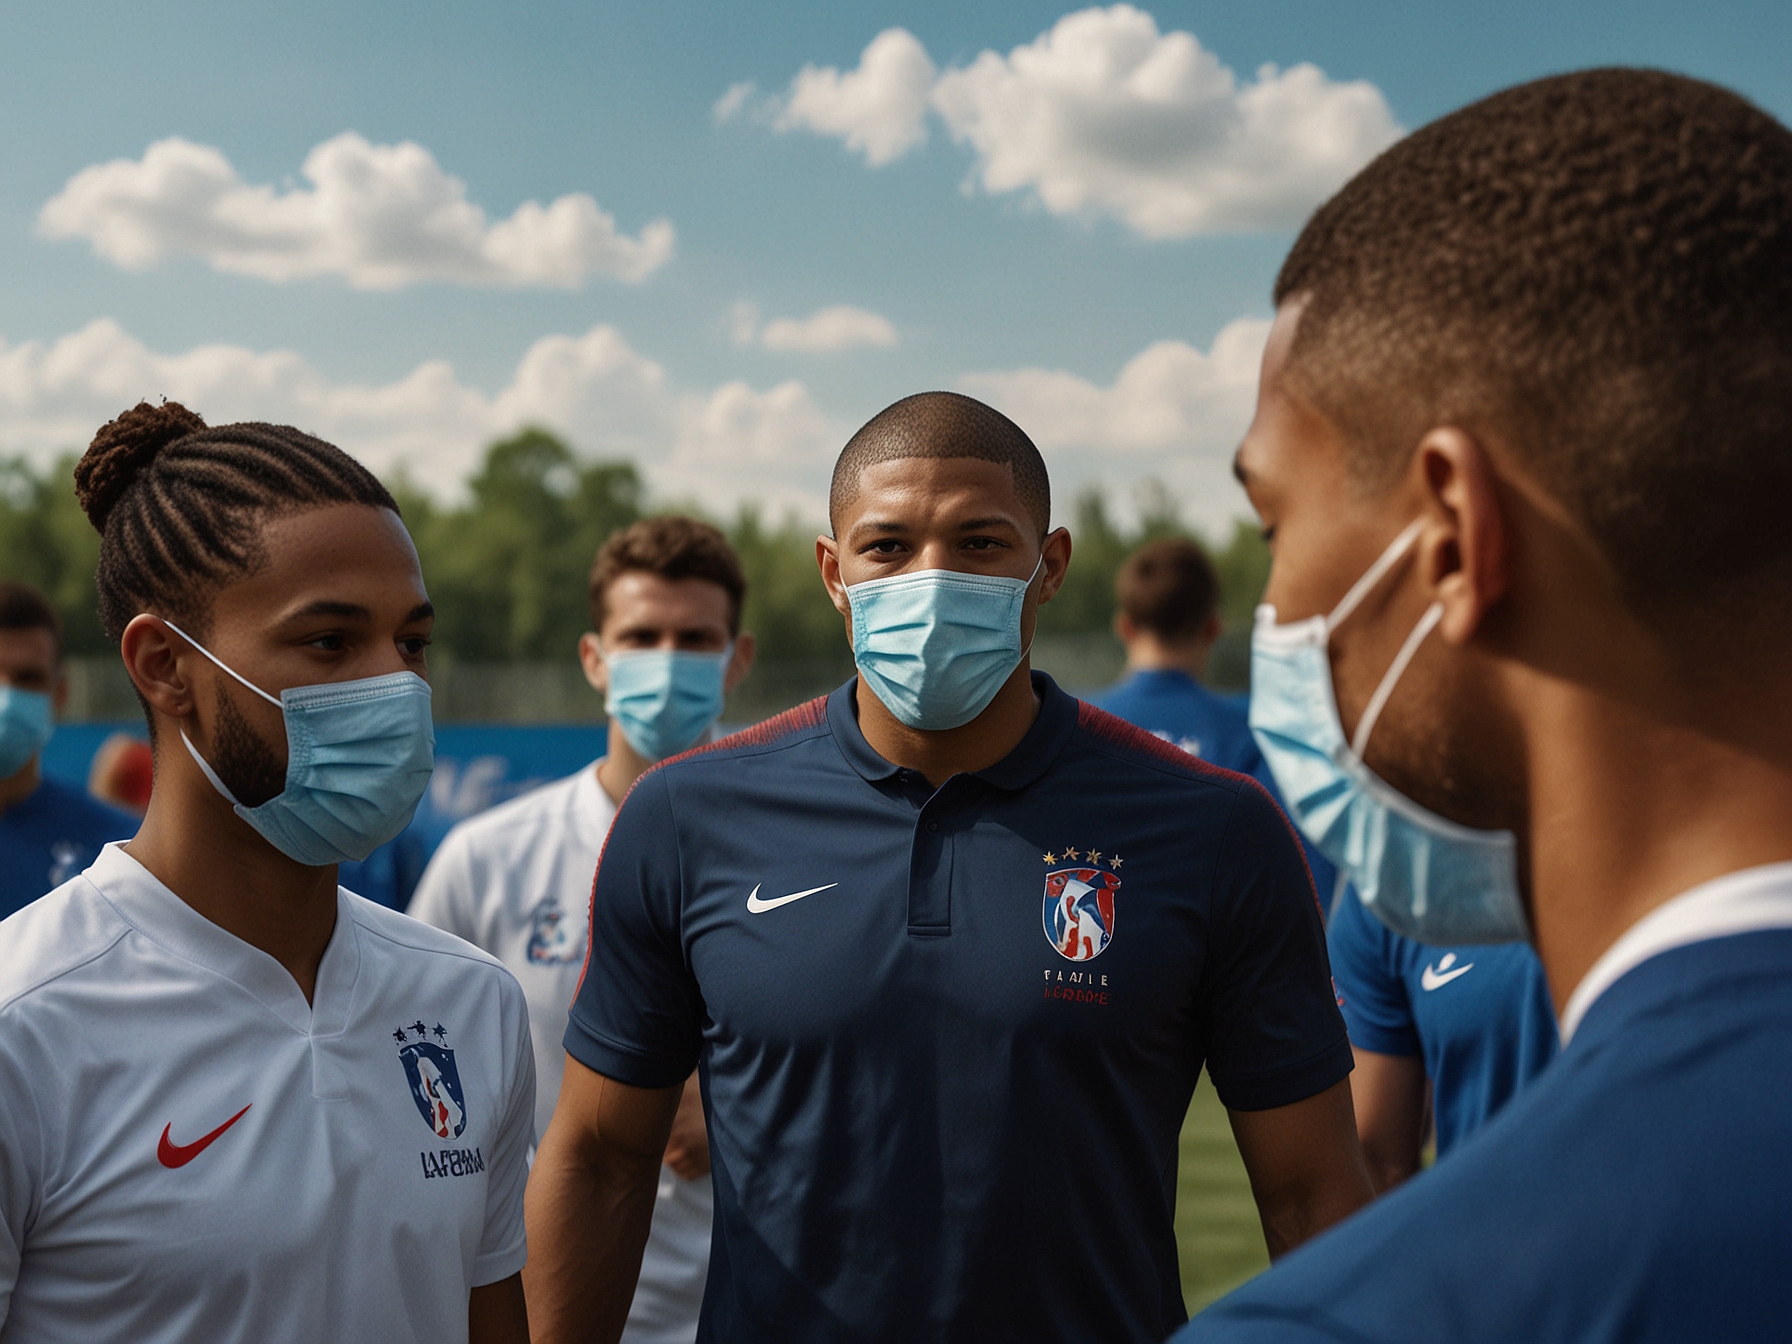 The French national team's medical staff and coaches surround Mbappe on the training ground, providing support and advice as he adjusts to his new protective mask. Teammates watch in solidarity, emphasizing unity ahead of the Poland match.